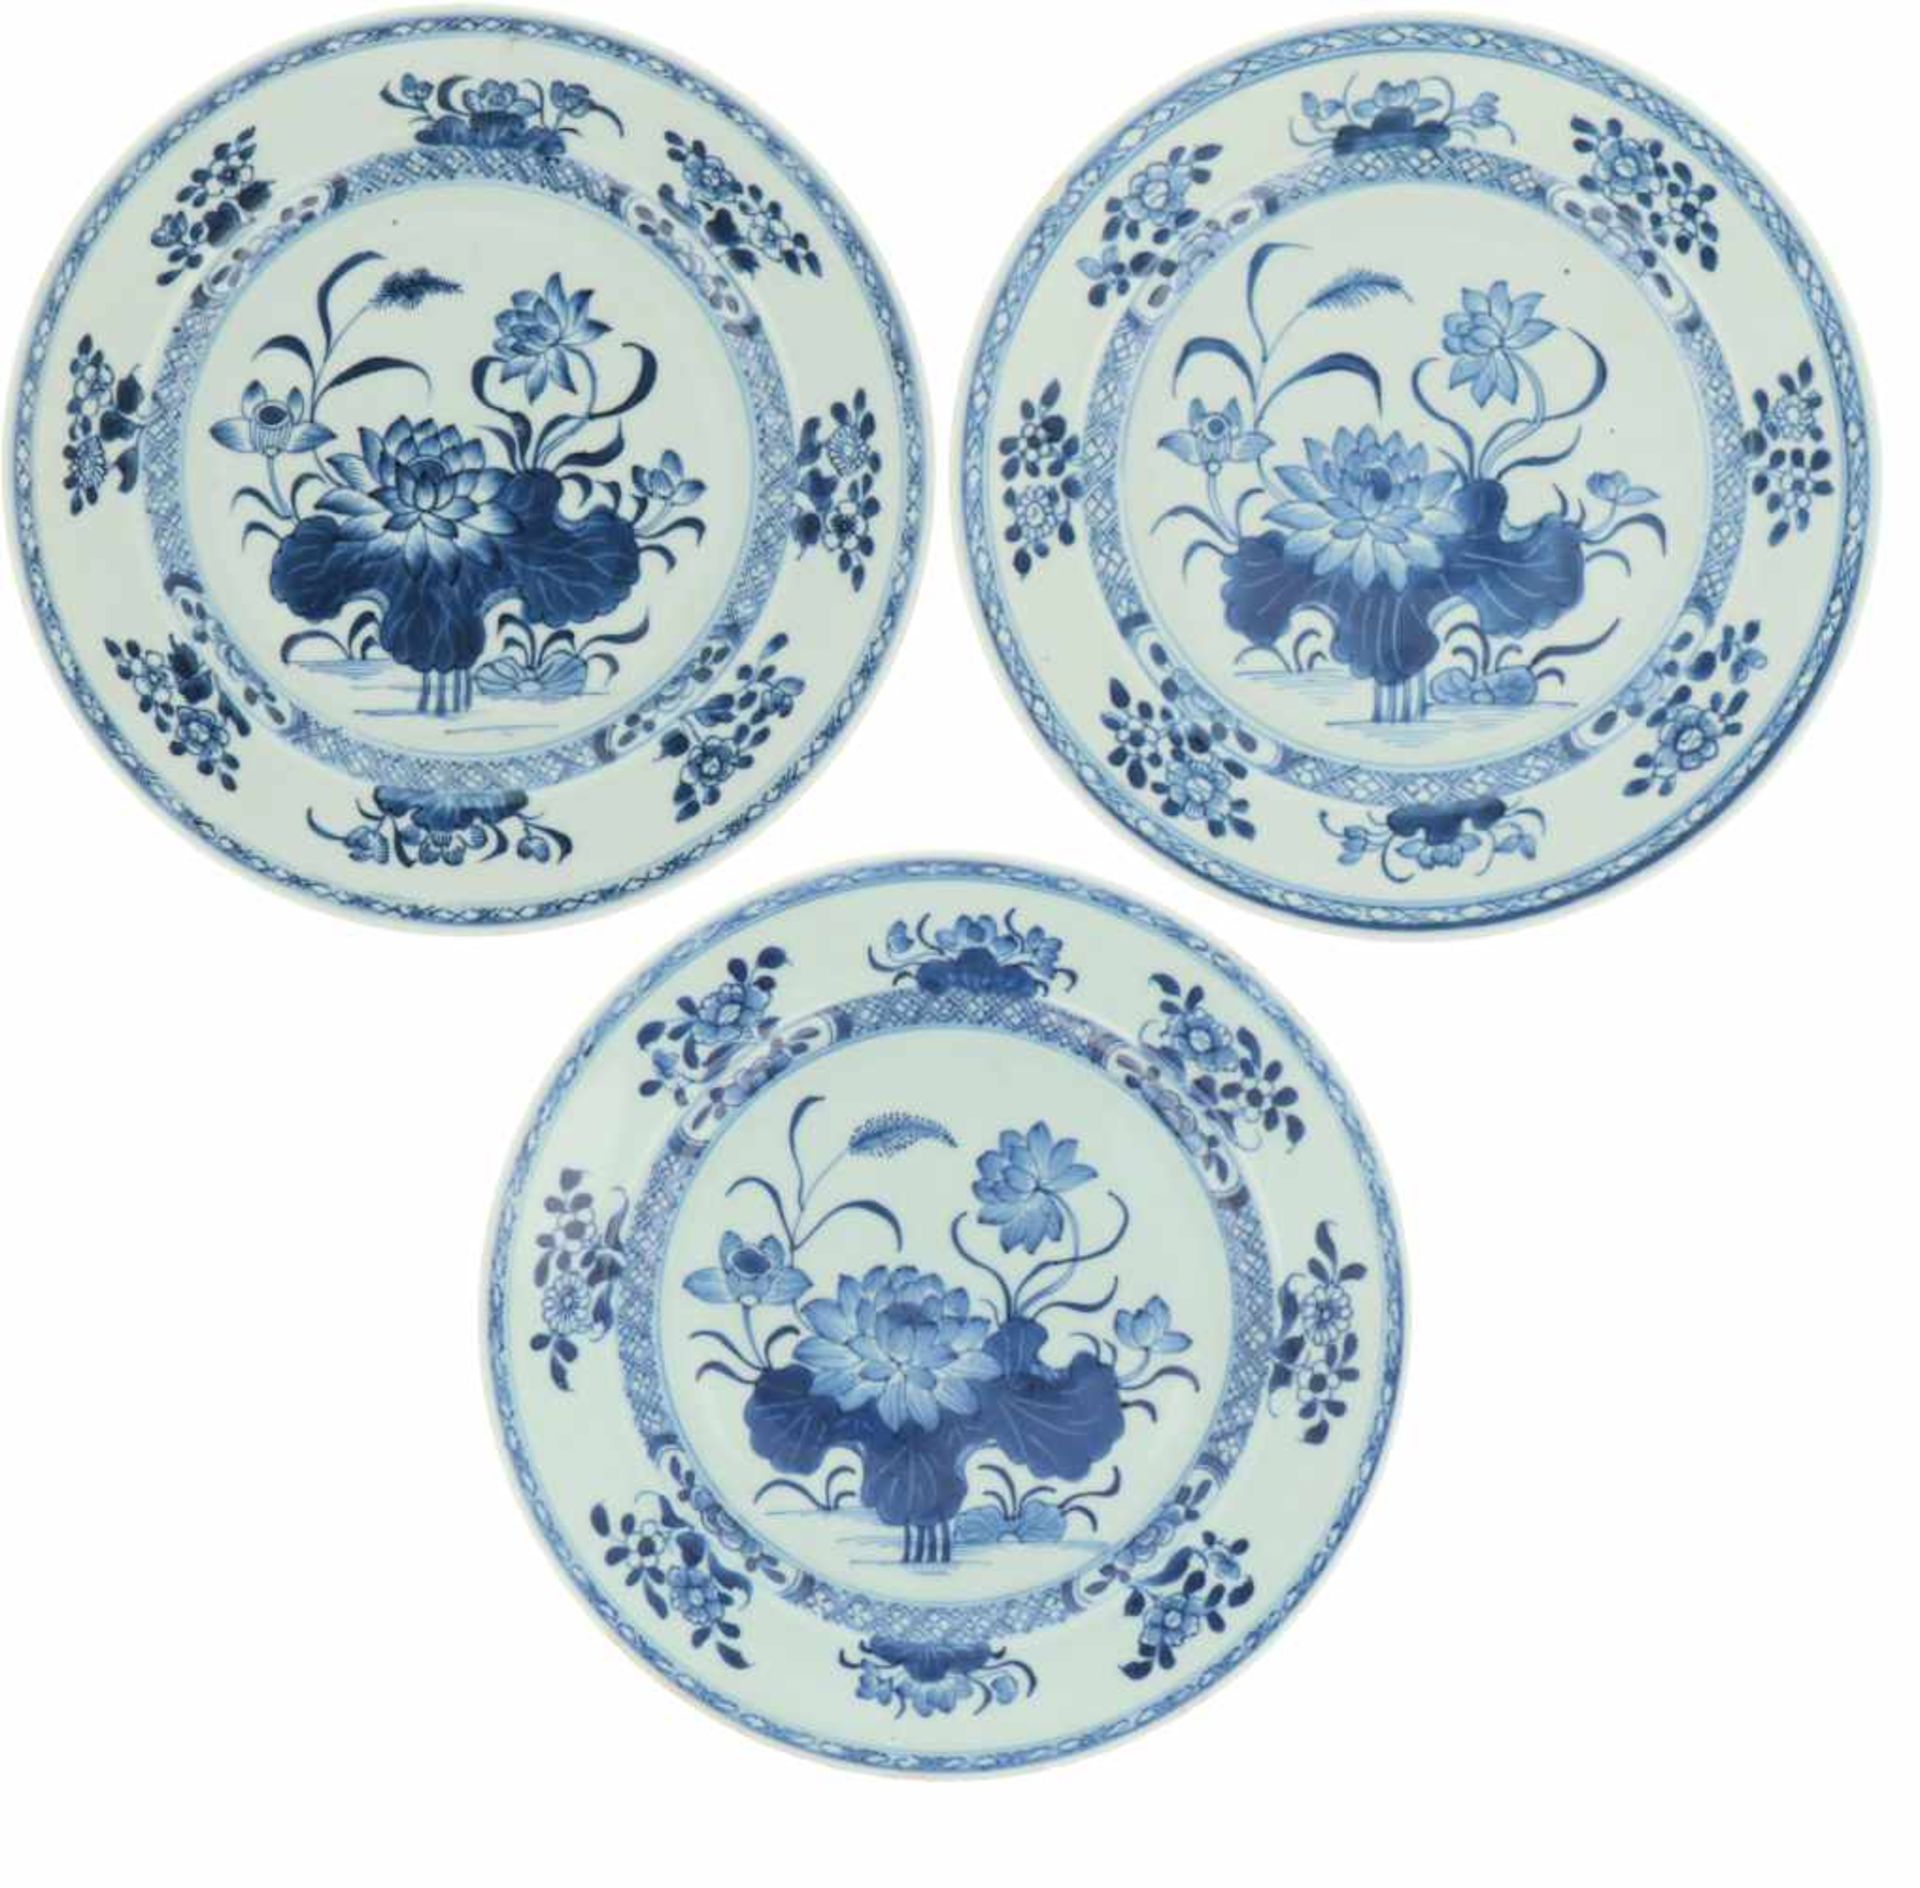 A set of (3) porcelain plates decorated with flowers. China, Qianglong.